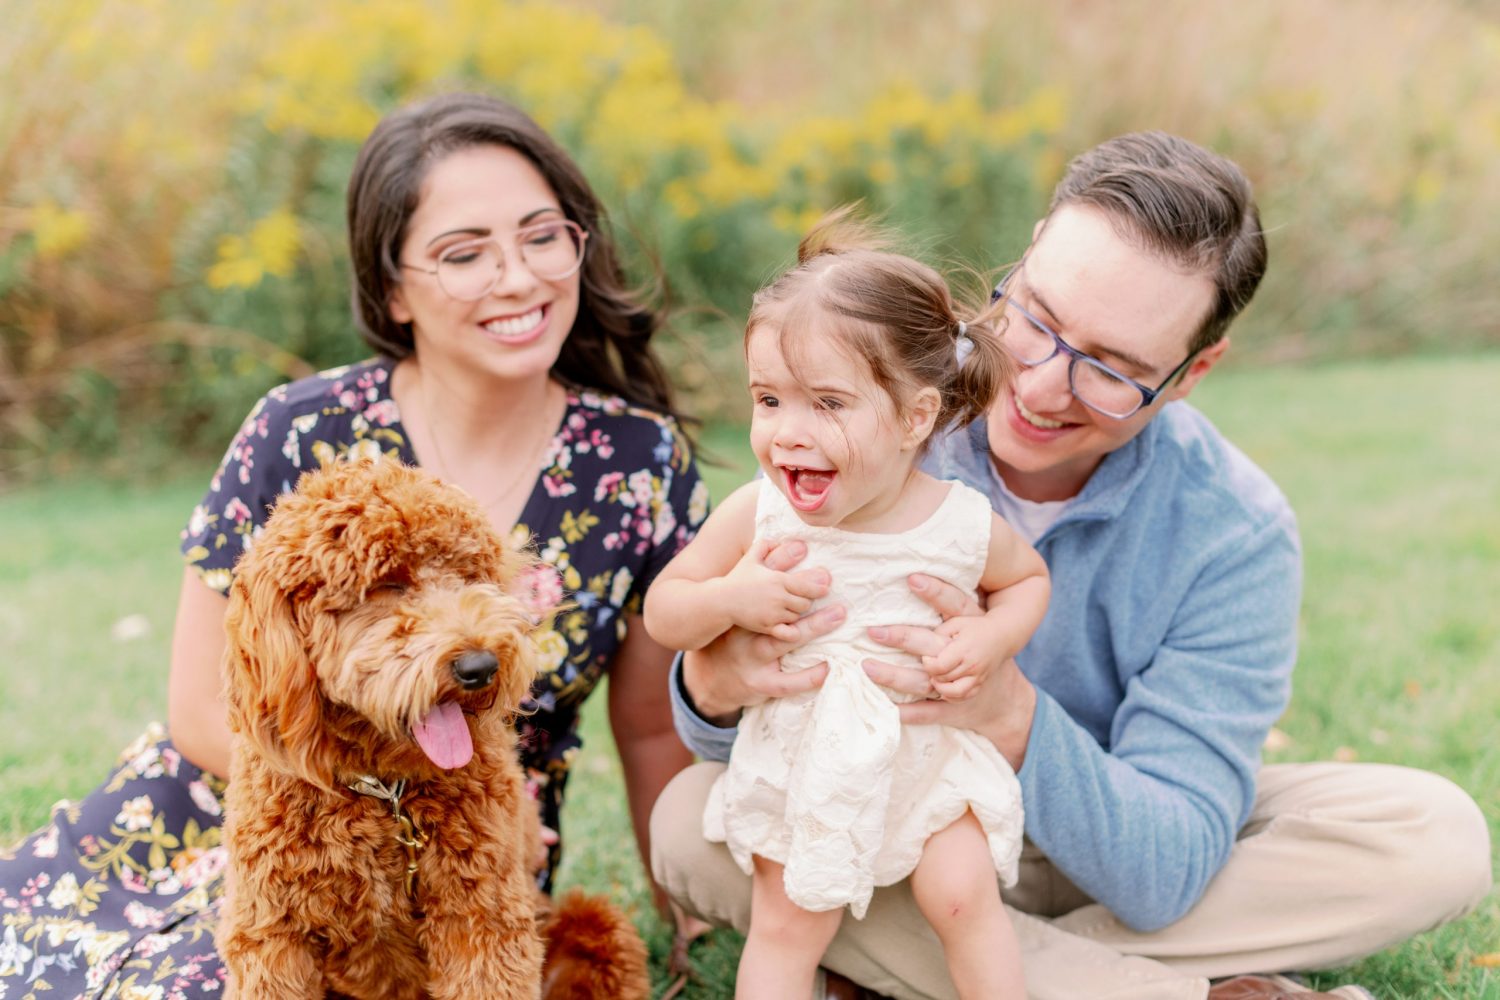 Dog Friendly Photo Locations in Chicago Suburbs - Chicago Family Photographer